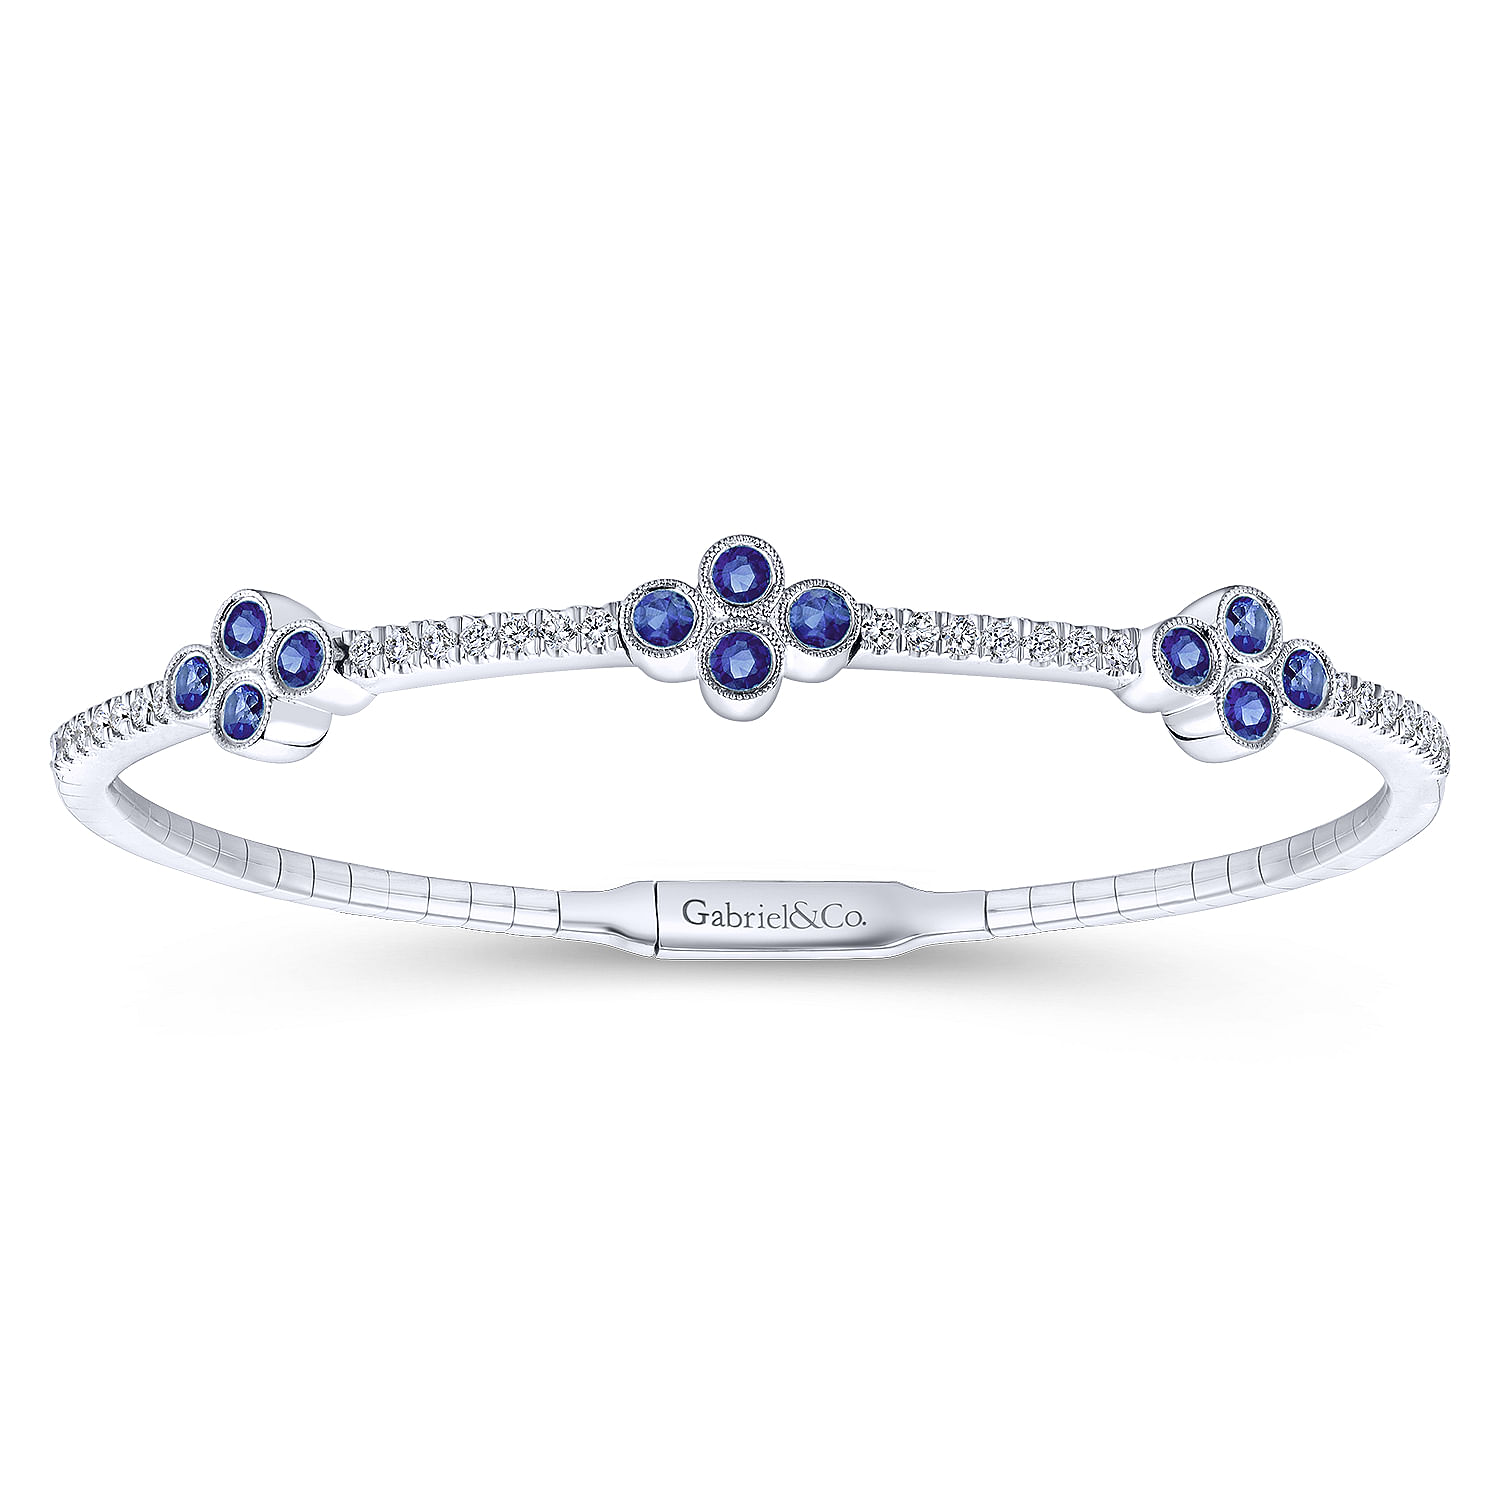 14K White Gold Bangle with Diamond and Sapphire Quatrefoil Stations